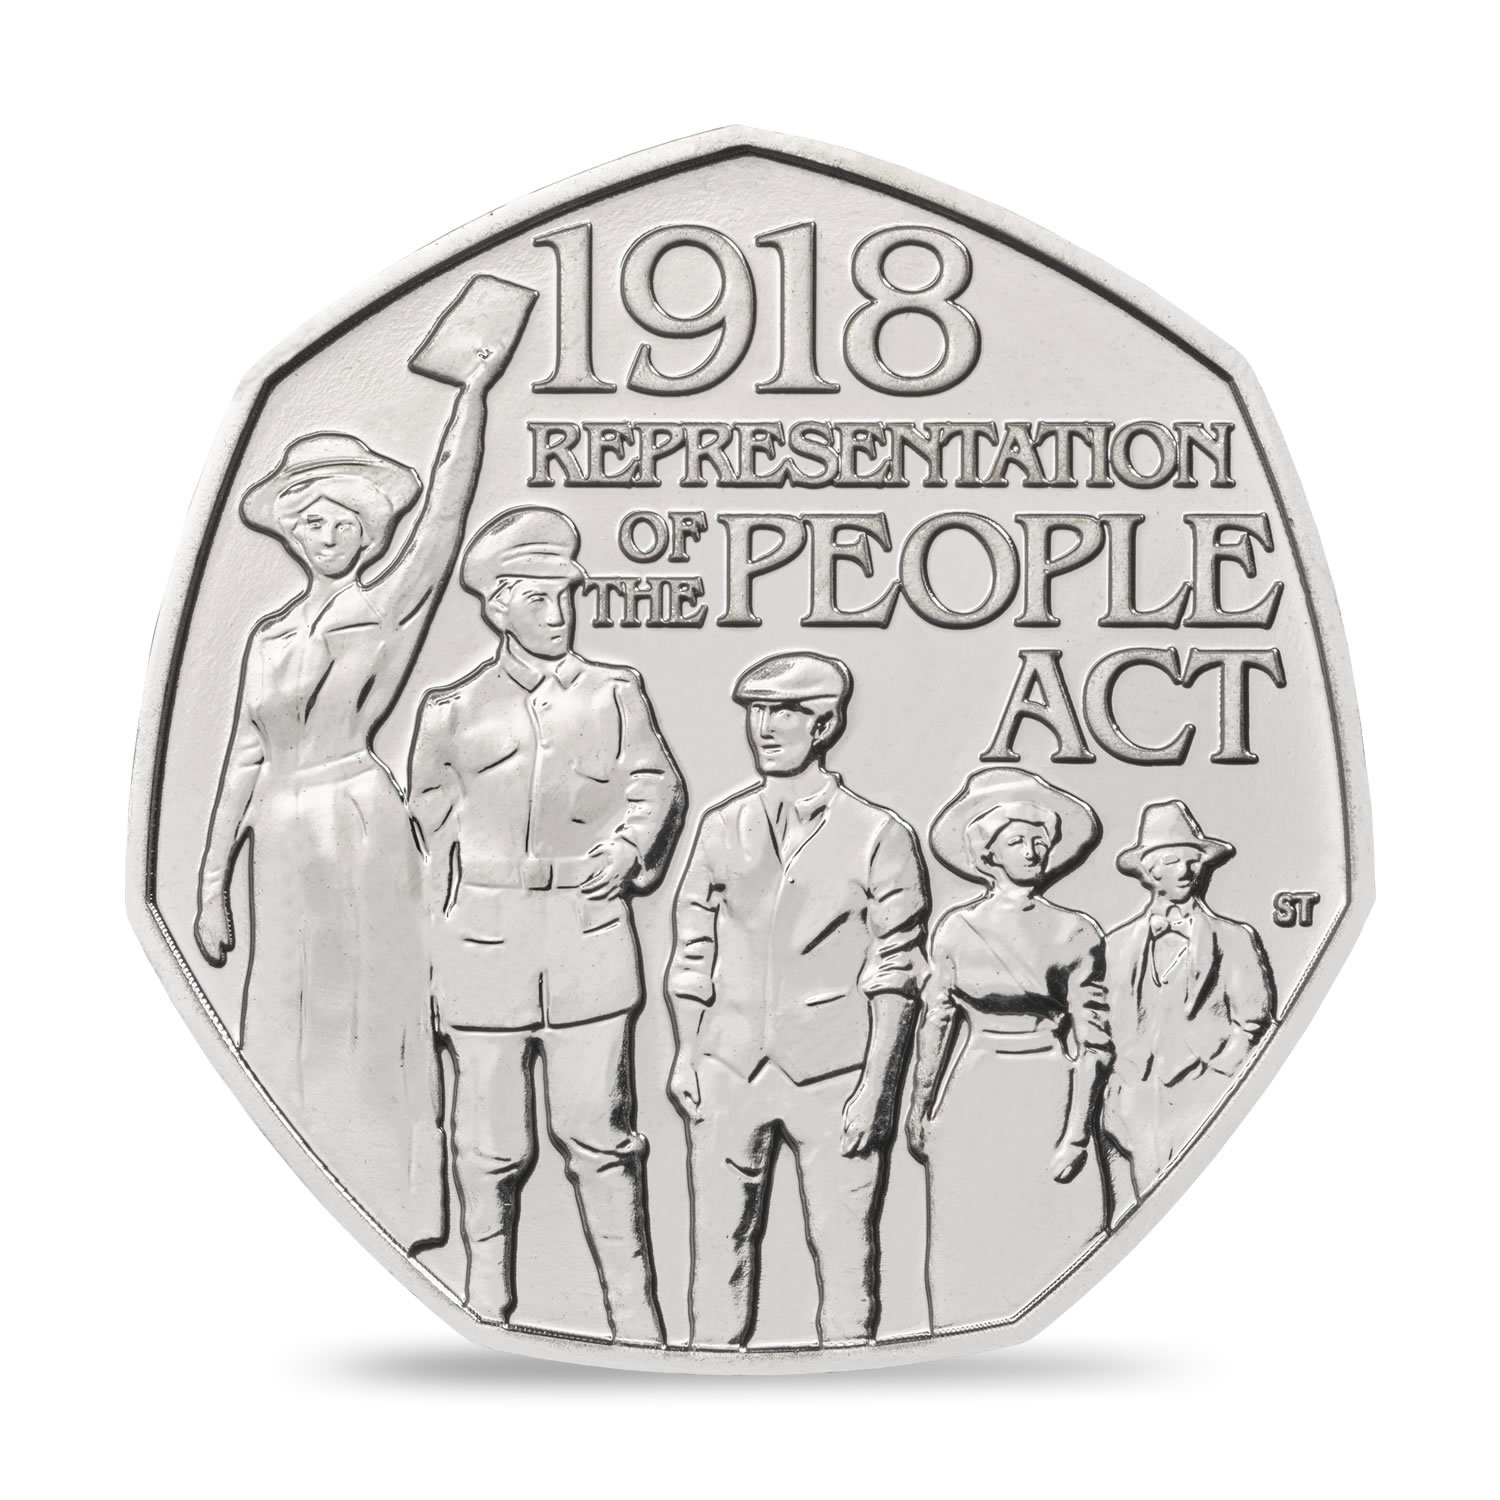 The Representation of the People Act 1918